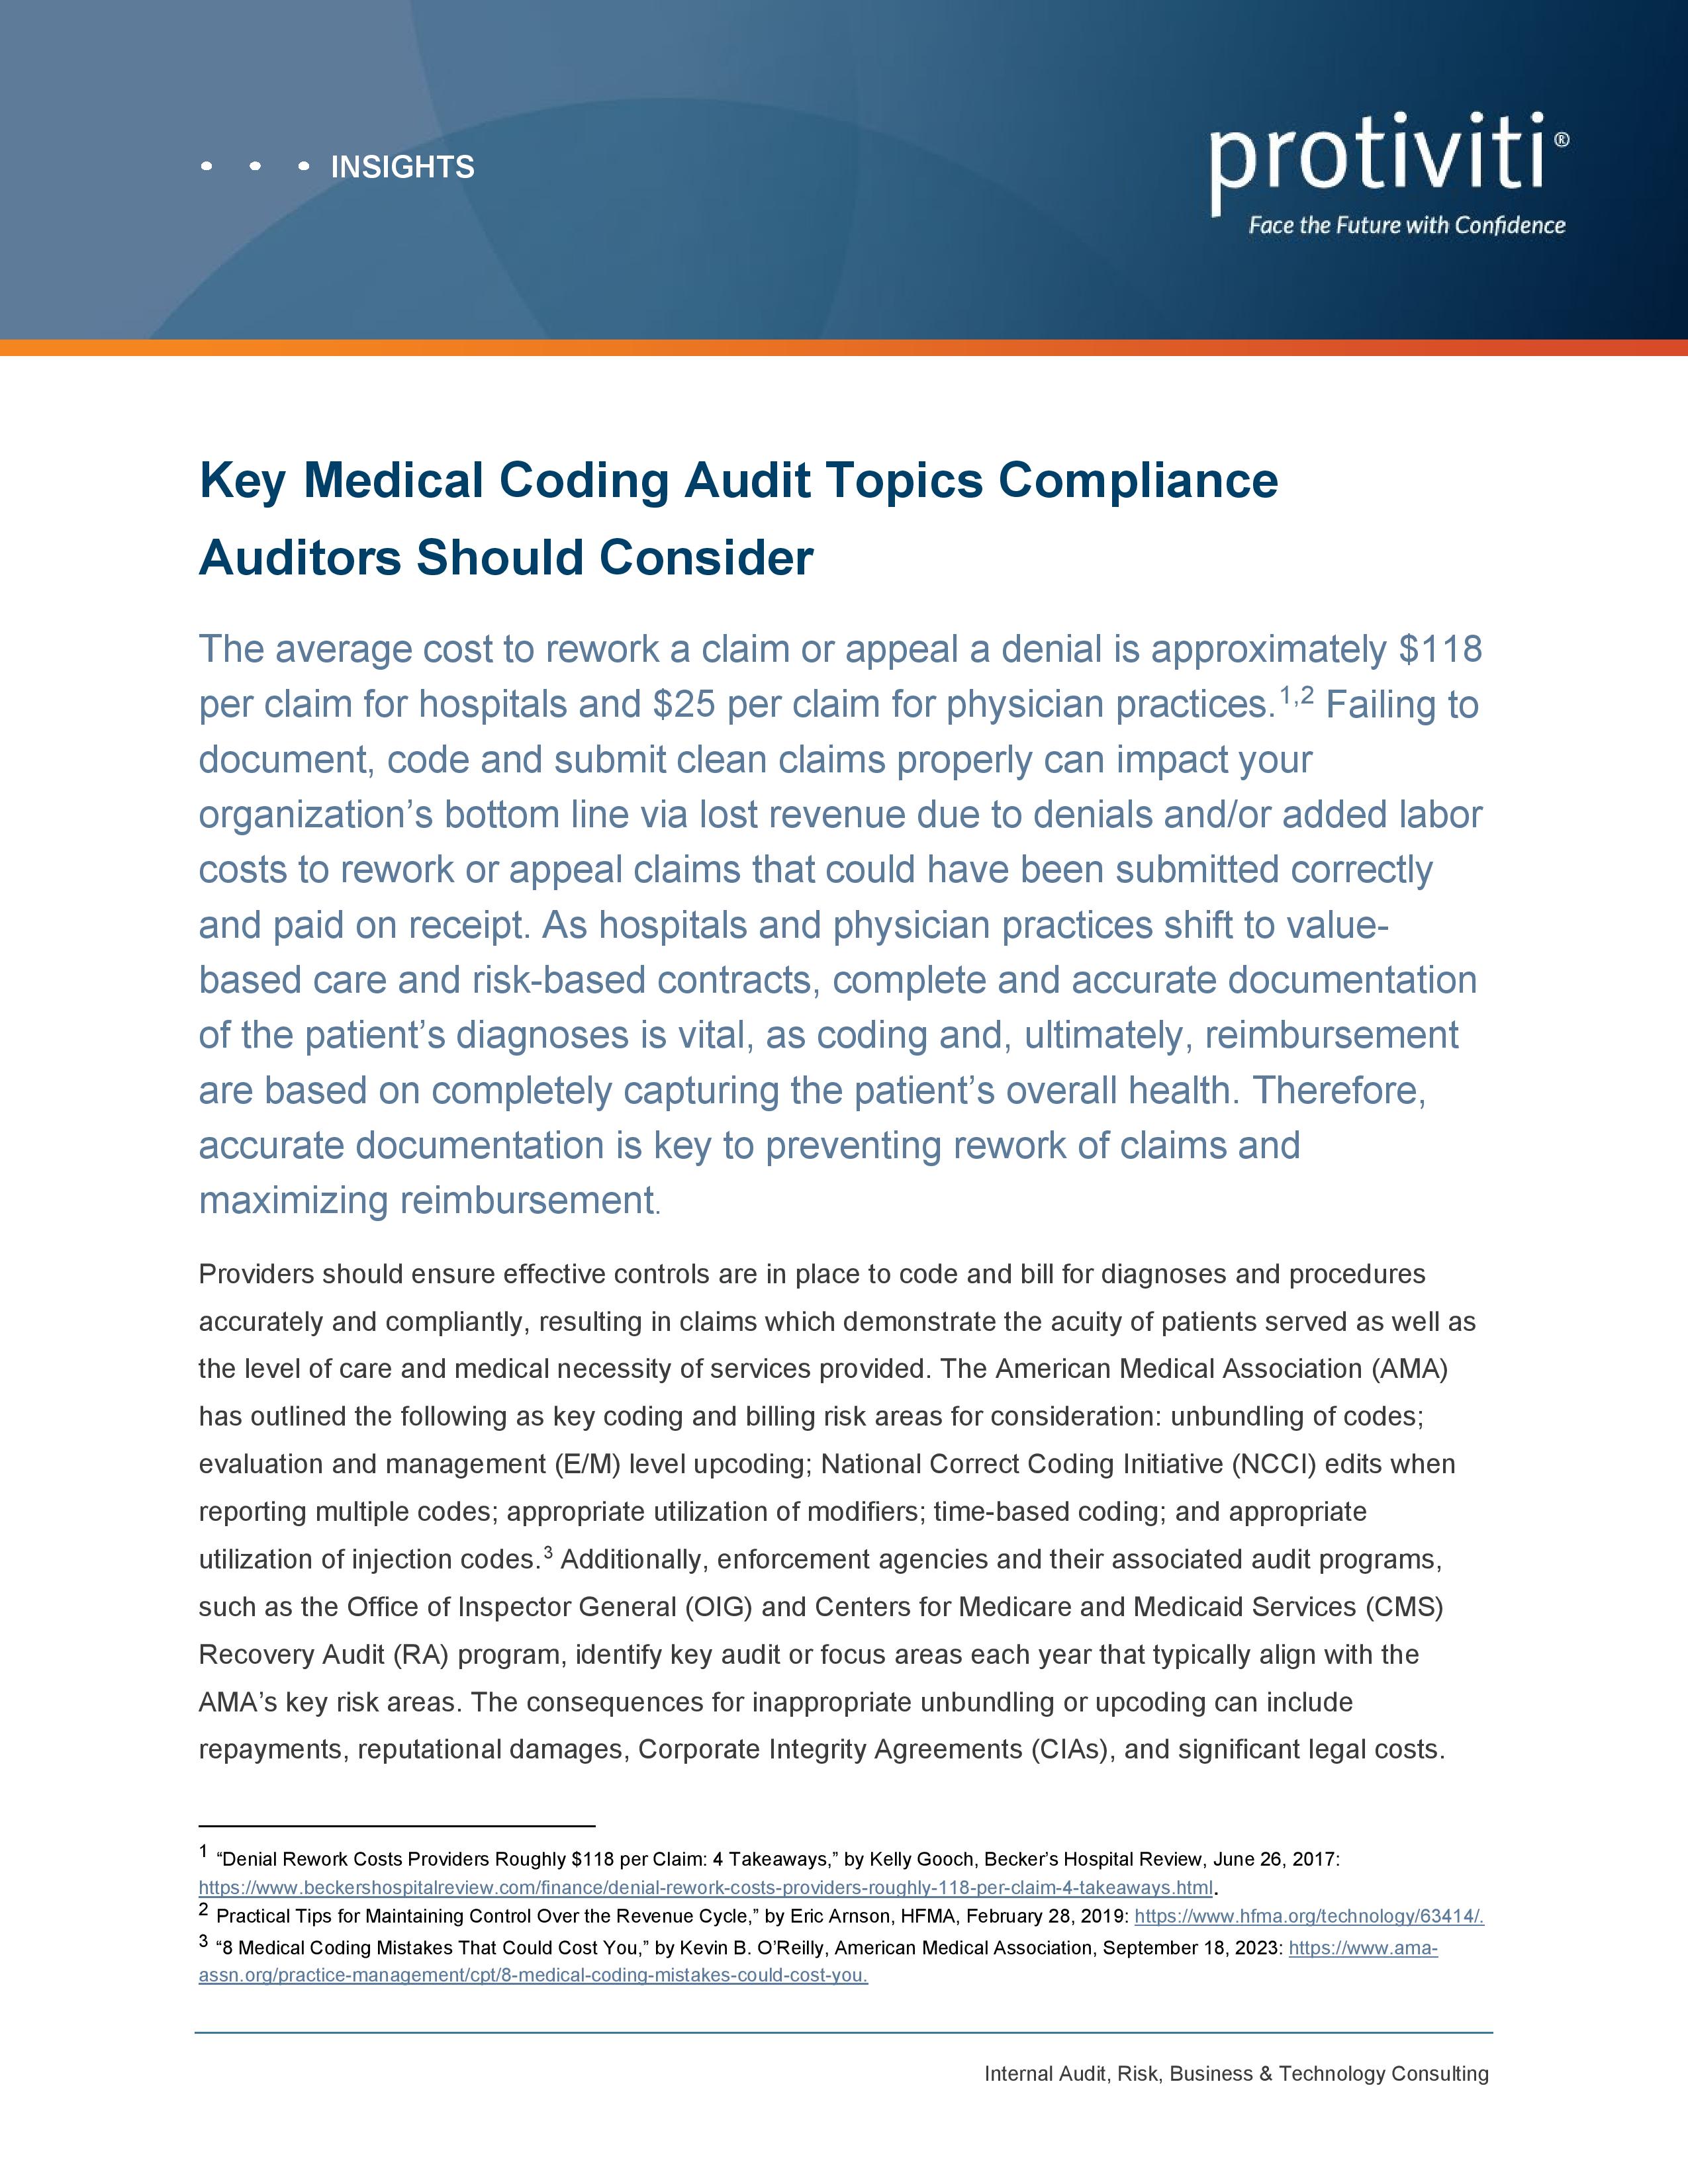 Screenshot of the first page of Key Medical Coding Audit Topics Compliance Auditors Should Consider